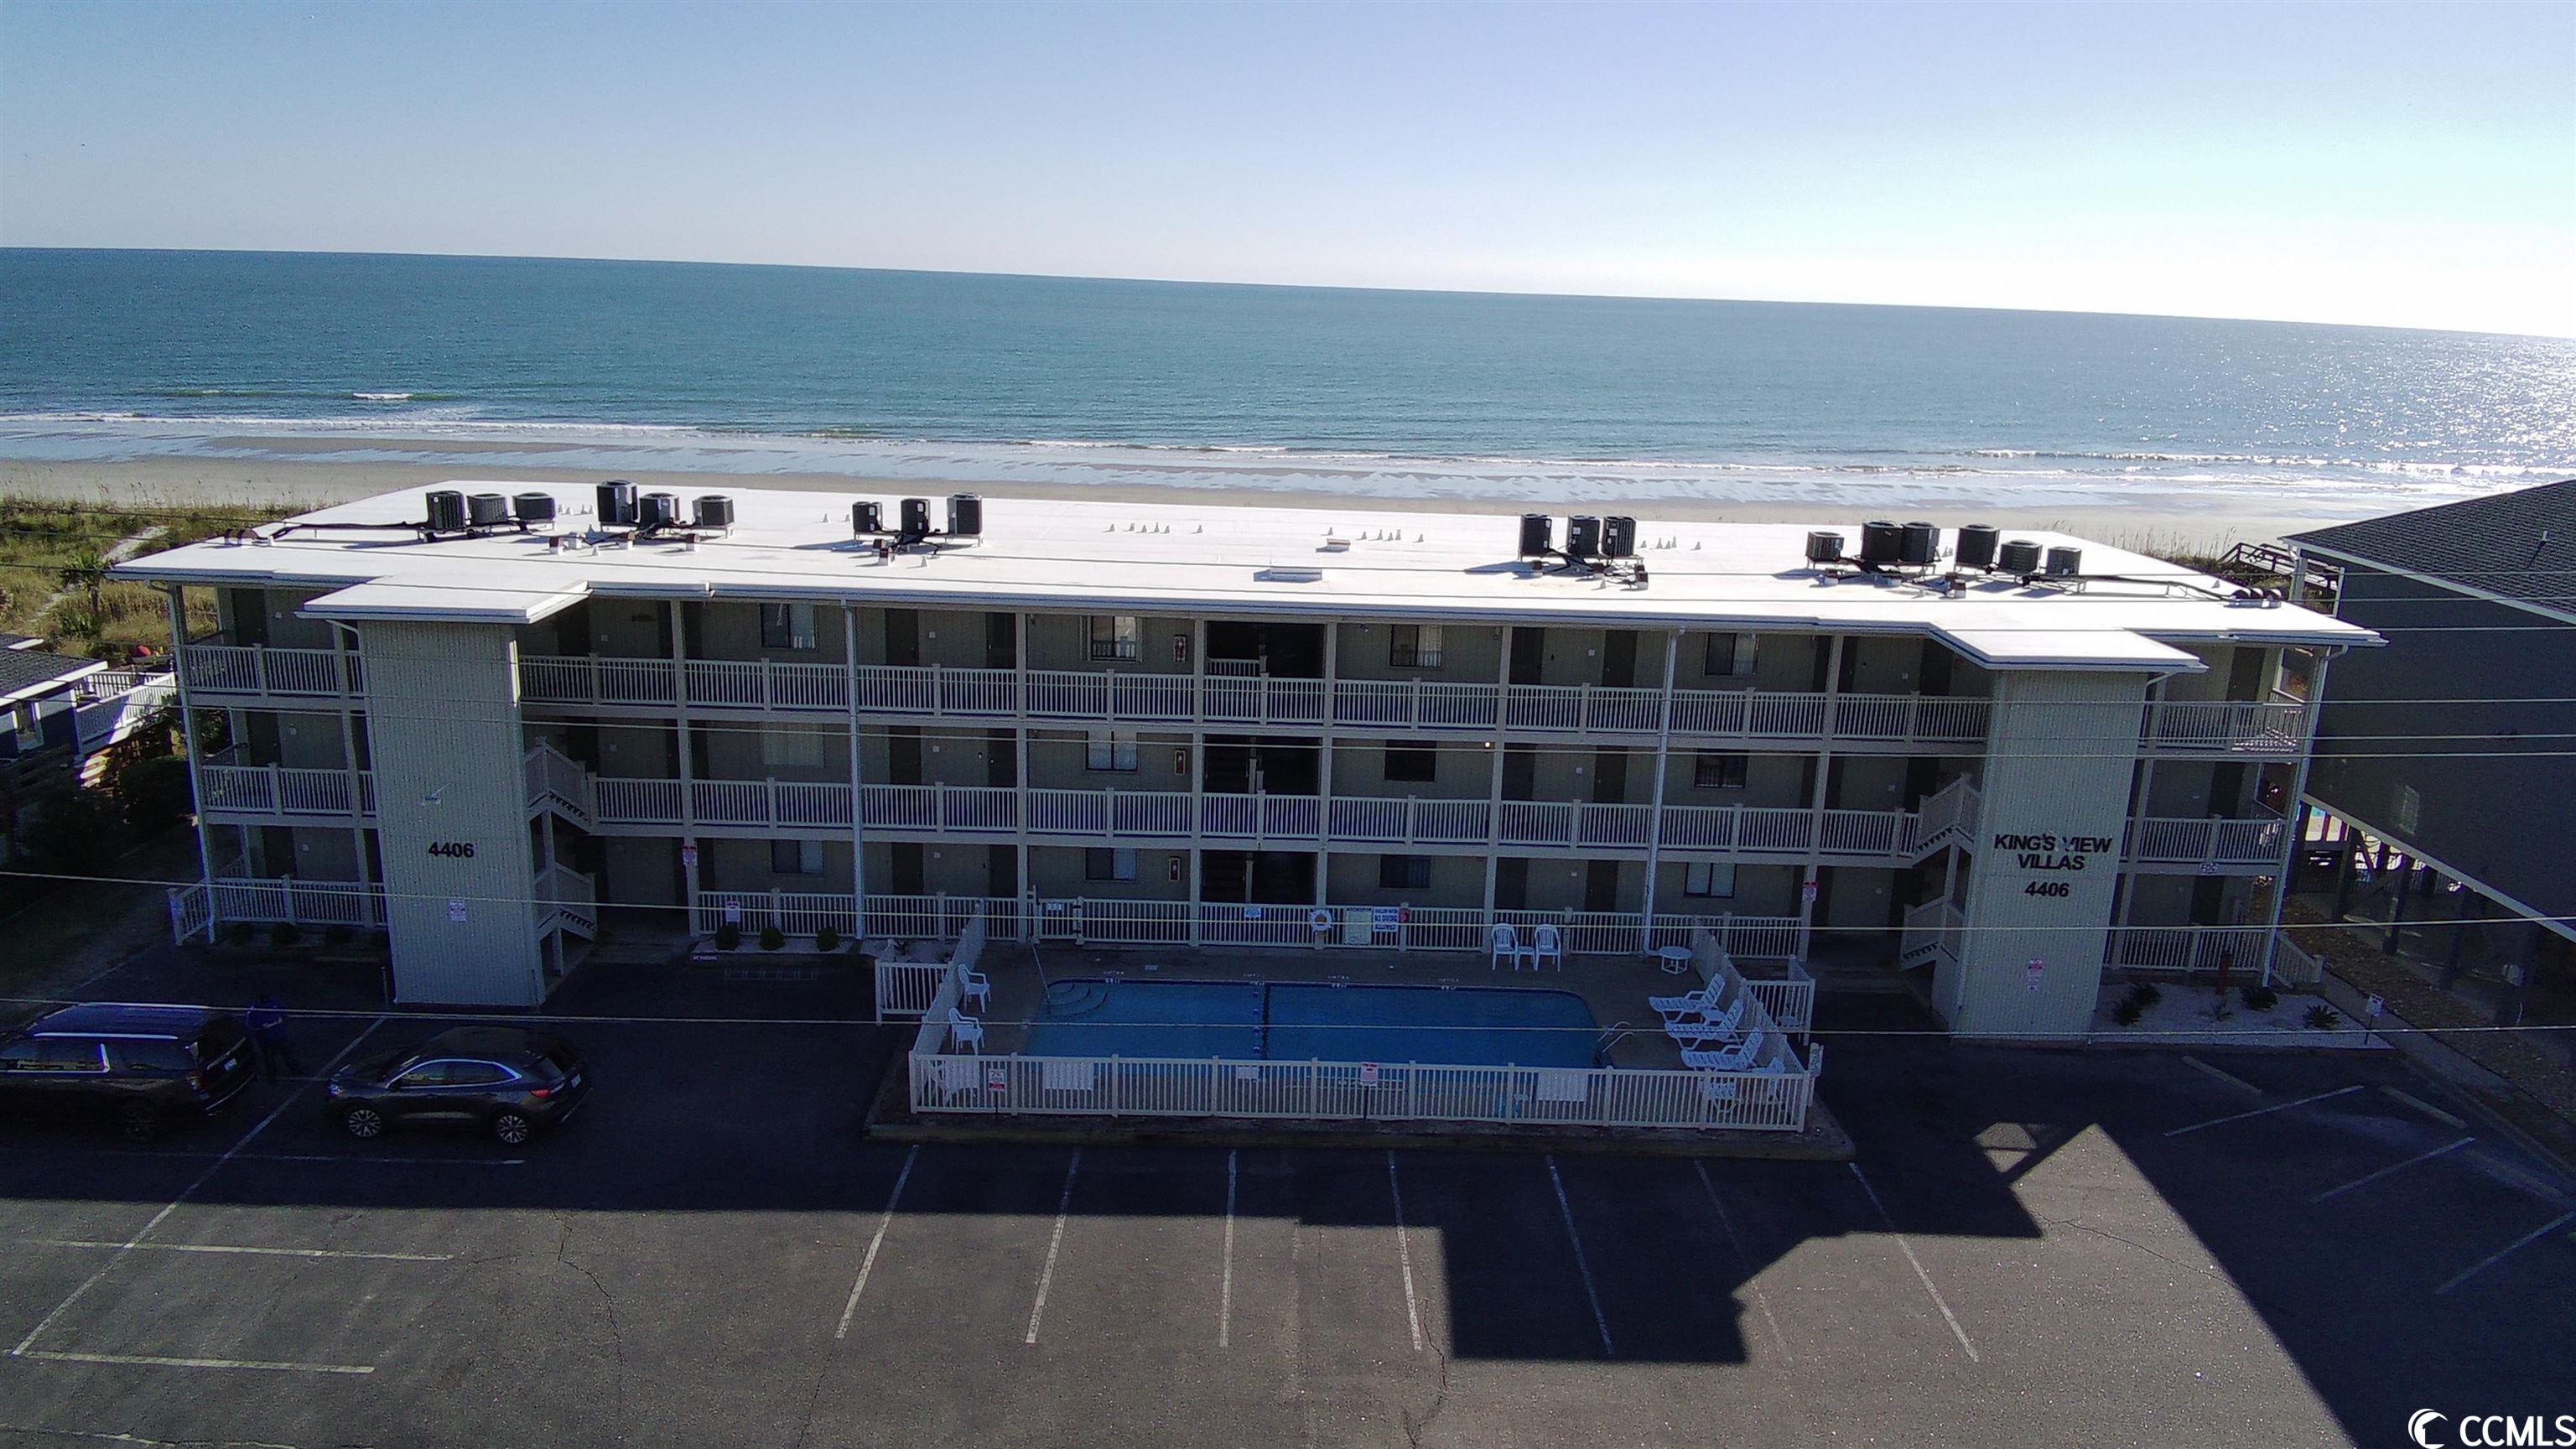 true ground floor unit with direct beach walk out. located in the very sought after area of cherry grove. this recently remodeled spacious ocean front 2 bedroom, 2 bath first floor unit has quartz countertops, tile back splash, stainless steel appliances, full size ice maker, tiled showers and lpv flooring throughout. this unit comes furnished including the new in 2022 stackable washer and dryer.  new hvac installed 2023. new roof 2022. new sliding glass doors in lr and master bedroom in 2023. owners have used the unit as a vacation home. unit has a large back porch with direct access to beach. thanks to mother nature the sand dunes have built up behind the condo. this has limited the direct ocean view; however, the crashing wavesounds are incredibly and it has awesome privacy and is only steps to the beach. come see this great beach getaway steps from the beach! currently with rented through march 31.